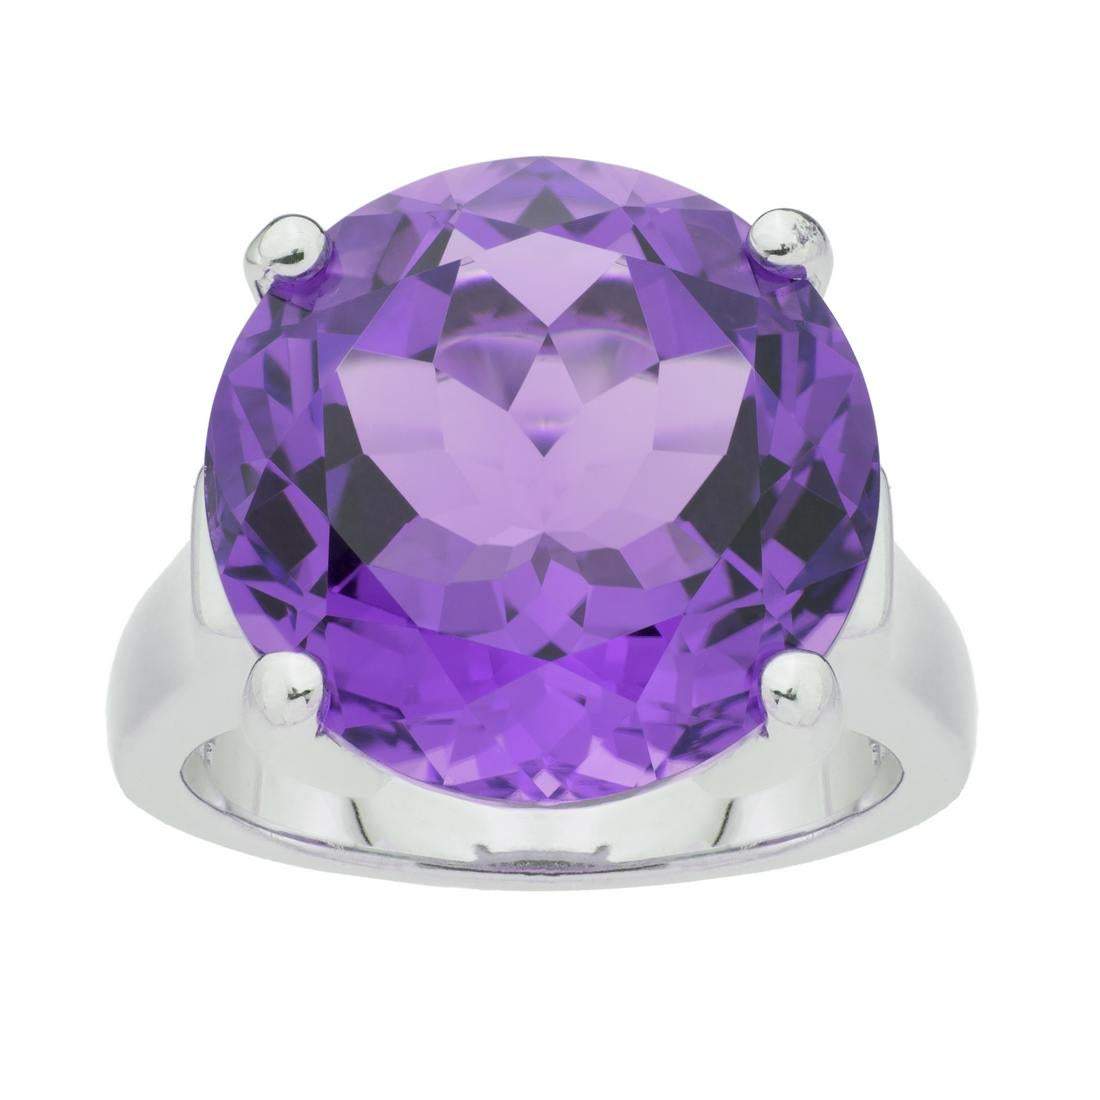 Stunning Silver 11.70ct Amethyst Solitaire Ring-SZ 7 - Shop Thrifty Treasures